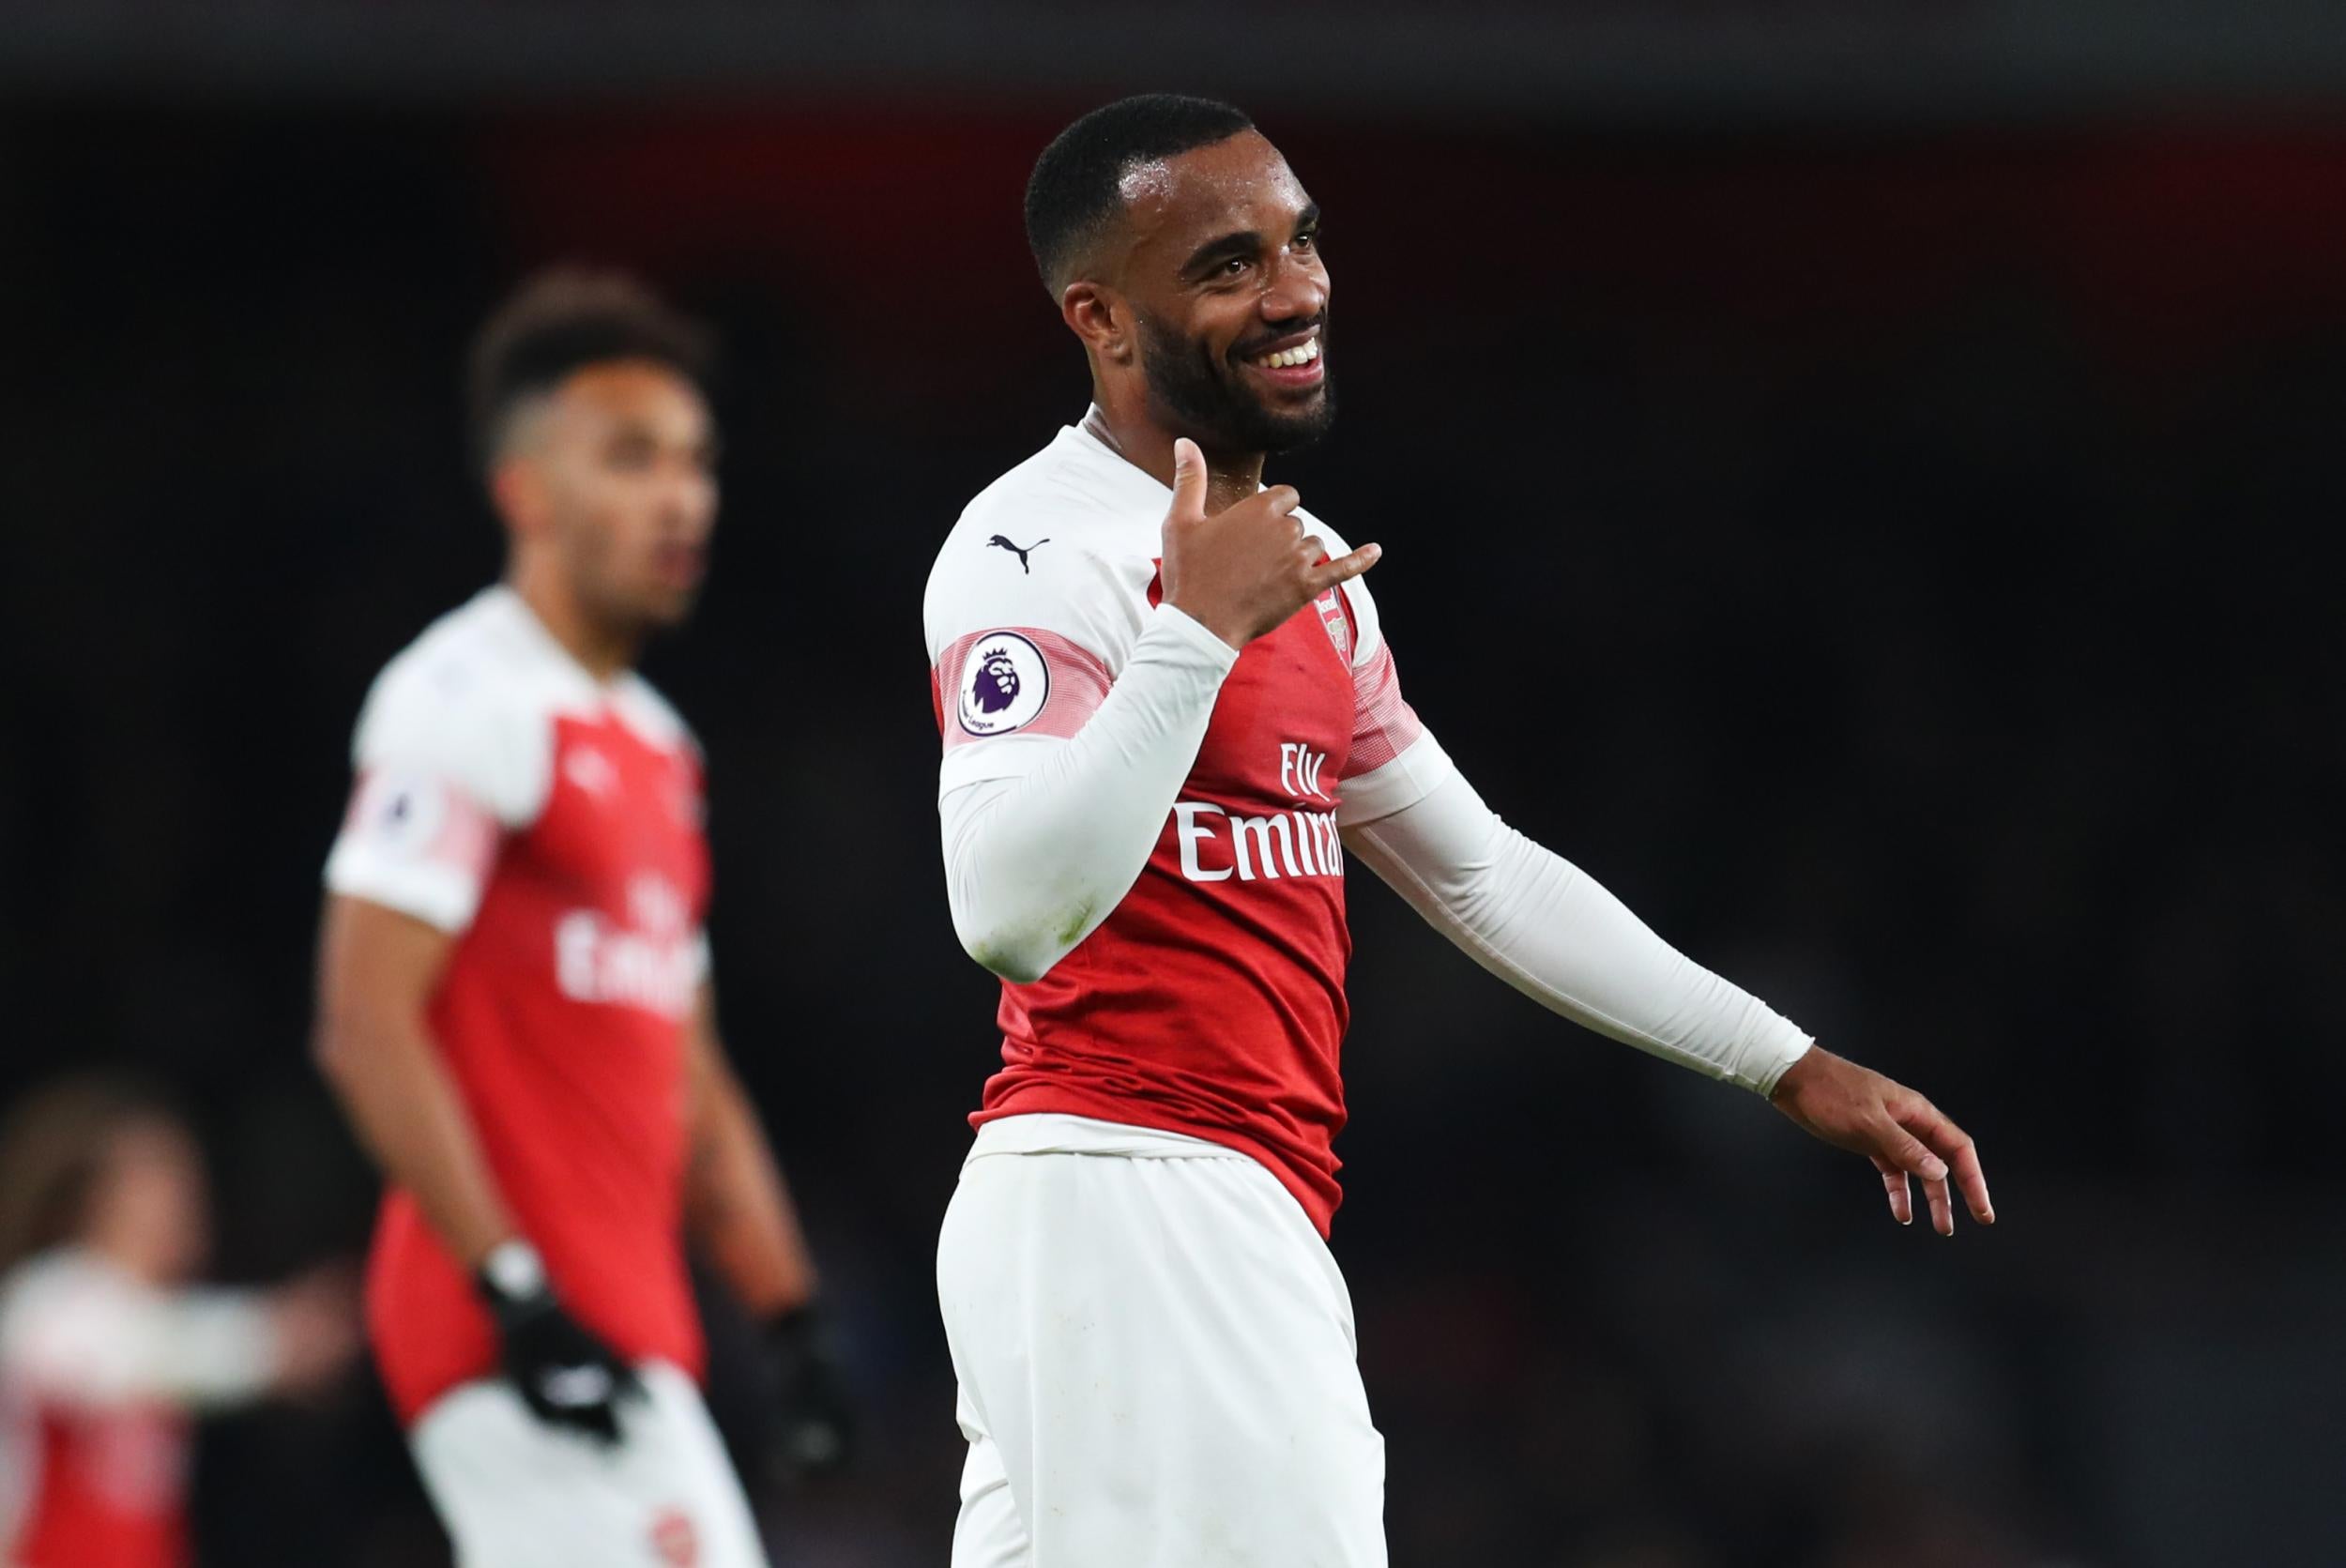 Alexandre Lacazette rounded out his side's scoring in added time of the second half